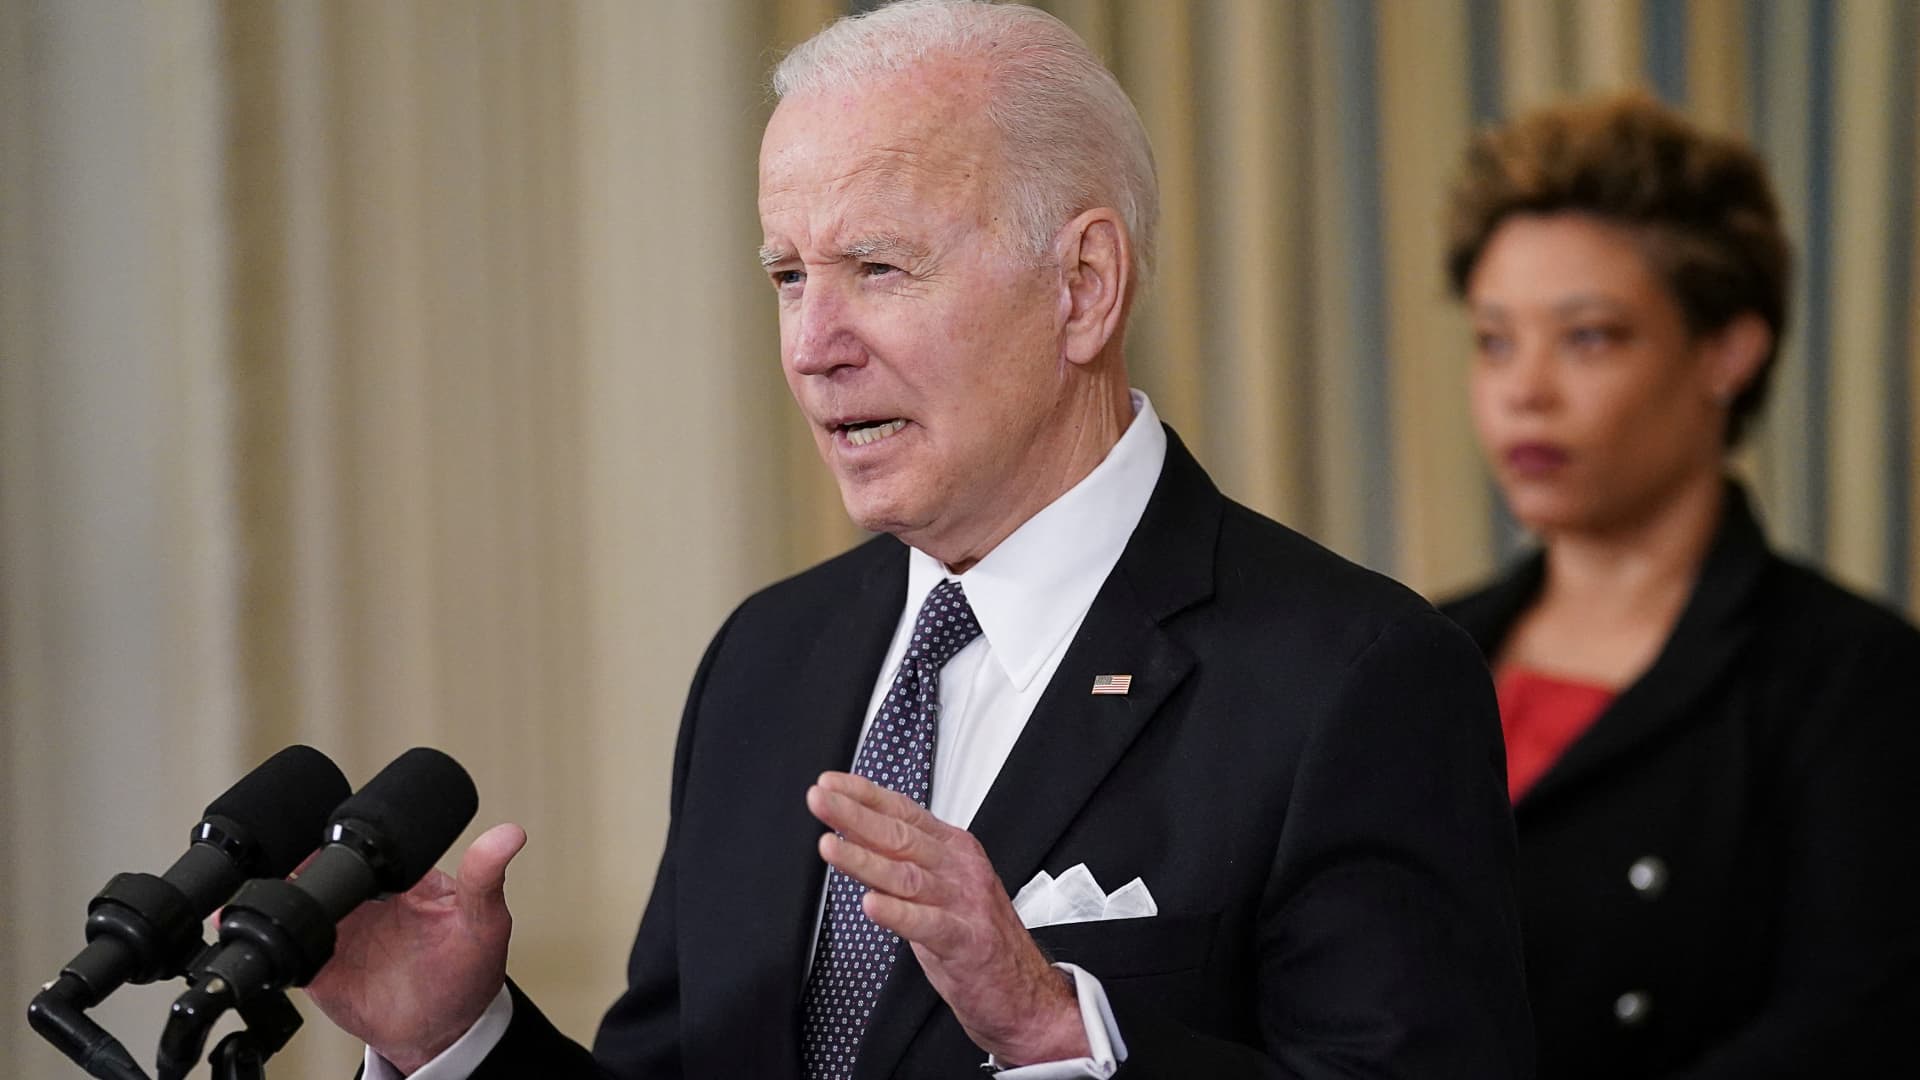 Biden says his ‘moral outrage’ at Putin does not signal a U.S. policy shift